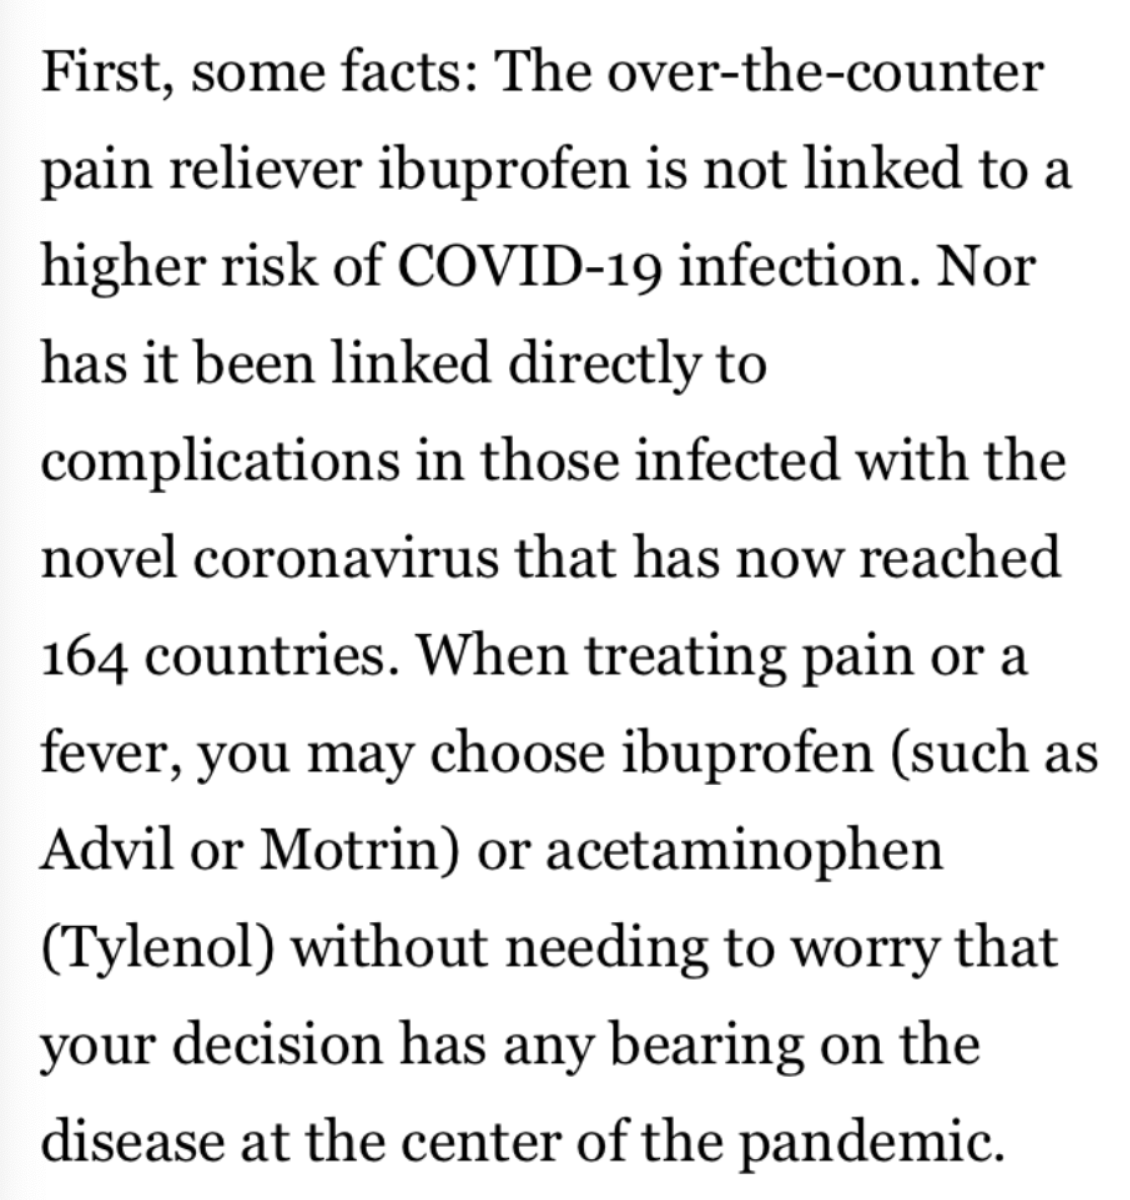 The expert + journalist consensus is the opposite. Here’s the lede of a well-meaning L.A. times article. https://www.latimes.com/science/story/2020-03-18/theres-no-good-reason-to-avoid-ibuprofen-if-you-are-infected-with-the-coronavirus